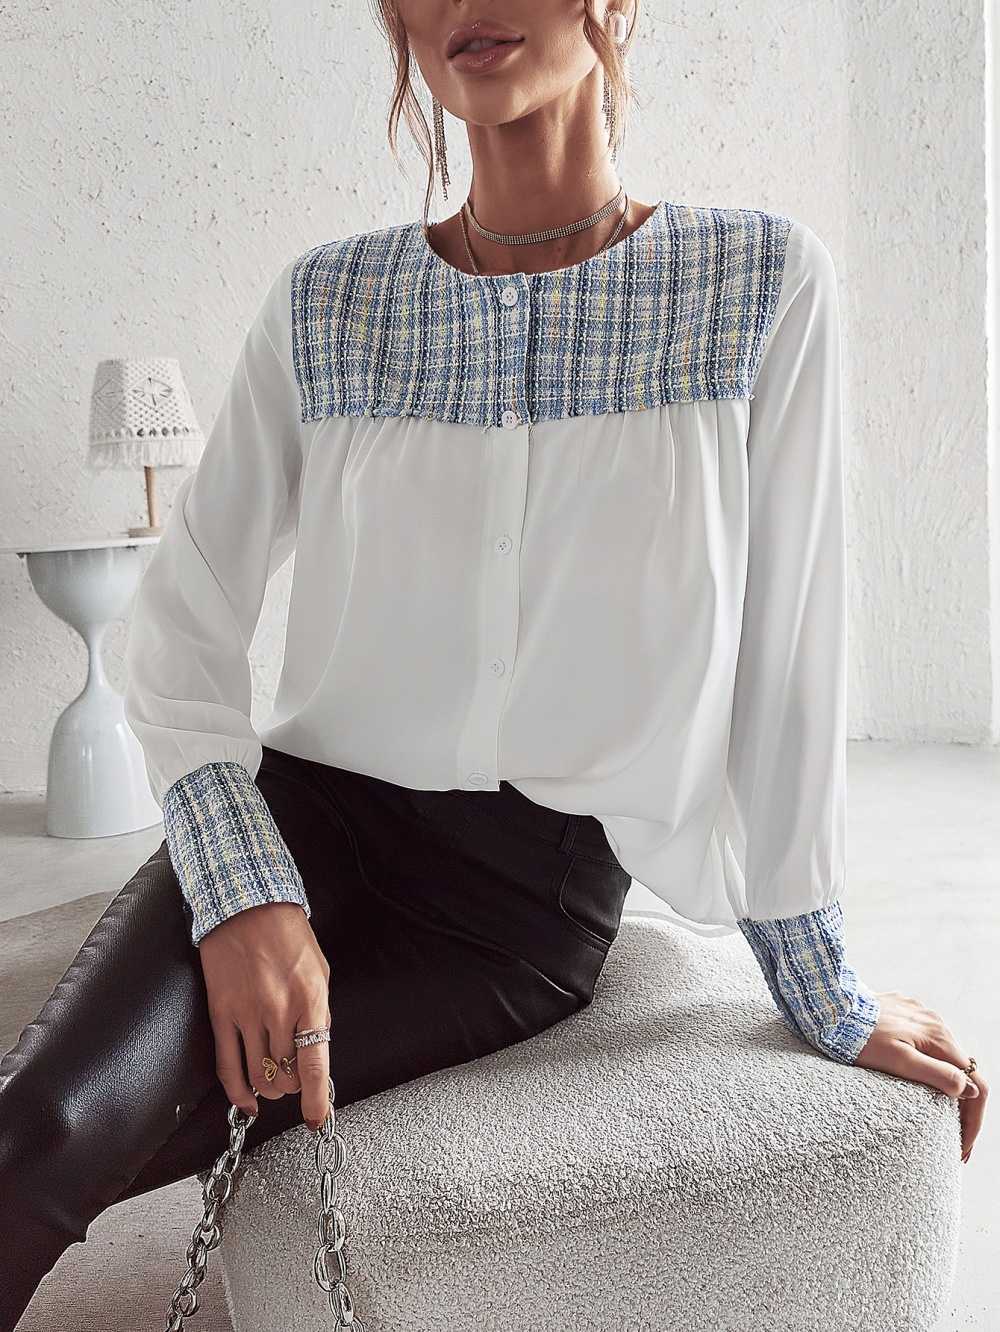 Splice spring and summer tops long sleeve all-match shirt